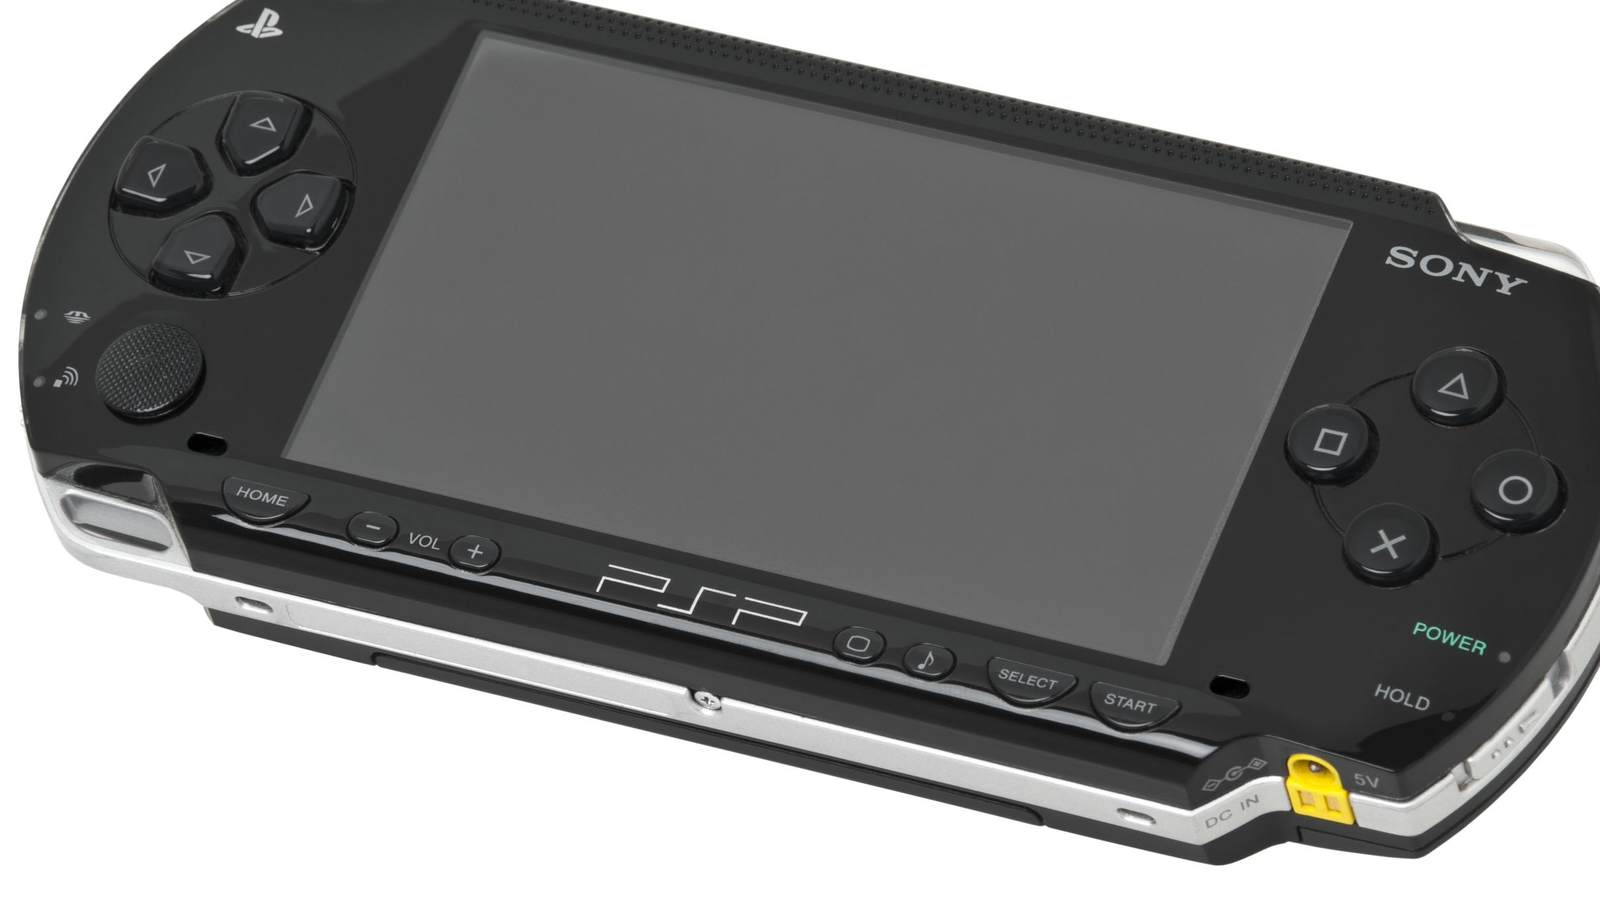 PlayStation To Remove PS3, PSP and PS Vita Content